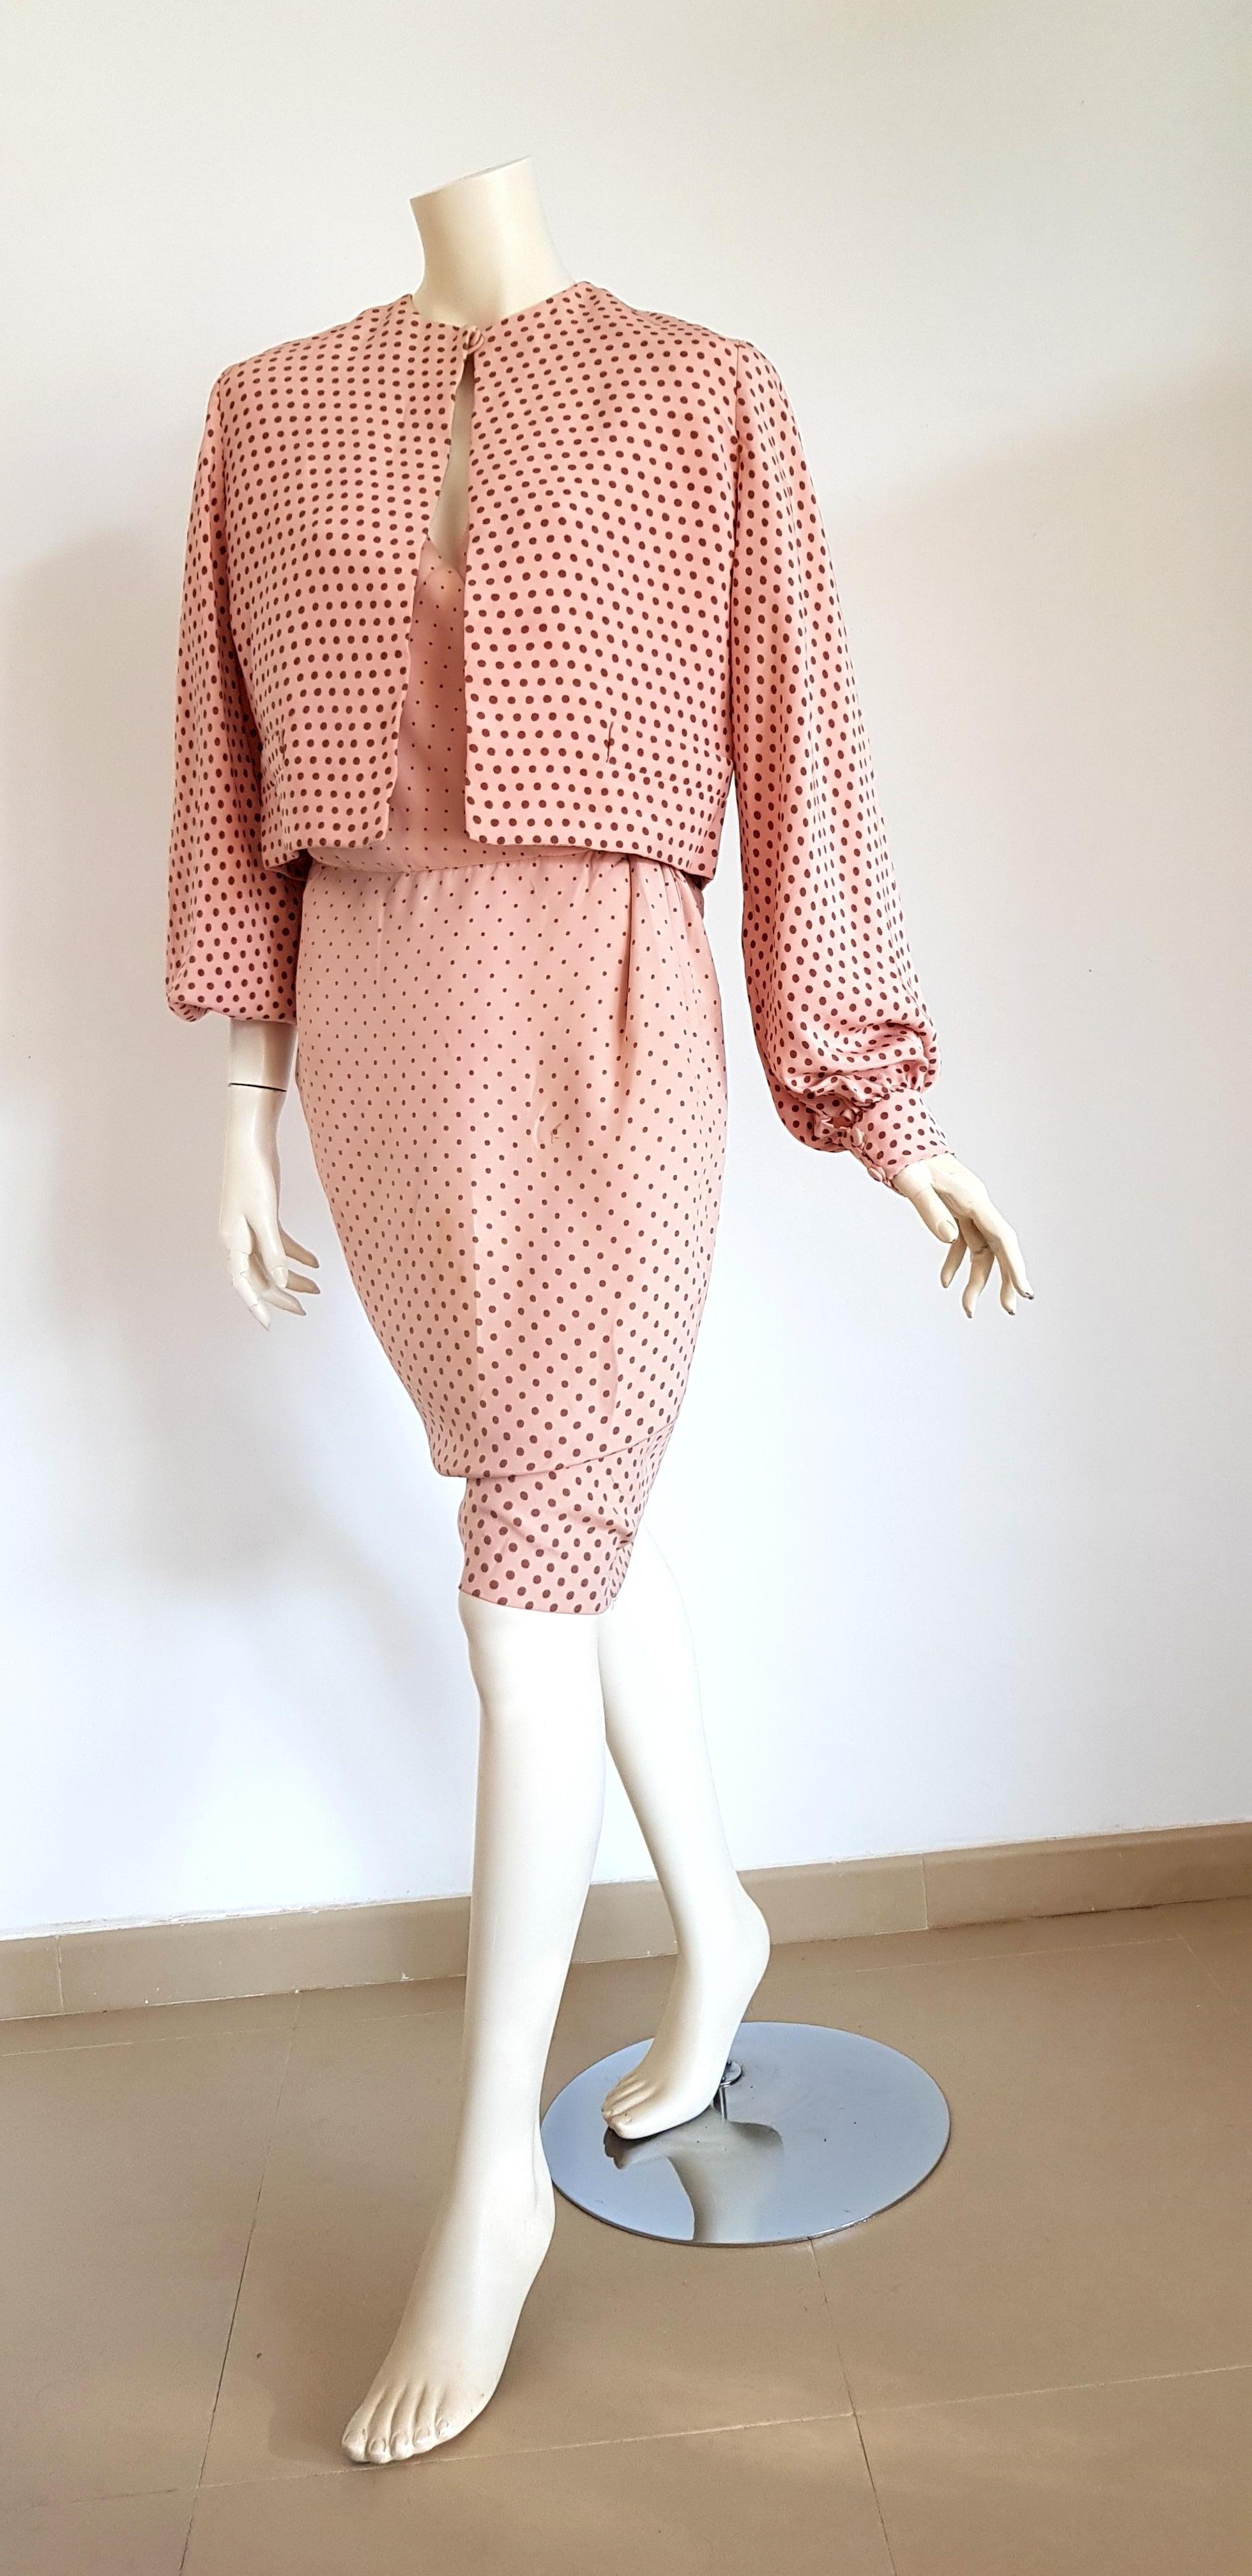 VALENTINO Haute Couture light pink with light brown polka dots, silk jacket and dress - Unworn

SIZE: equivalent to about Small / Medium, please review approx measurements as follows in cm. 
DRESS: lenght 100, chest underarm to underarm 50, bust